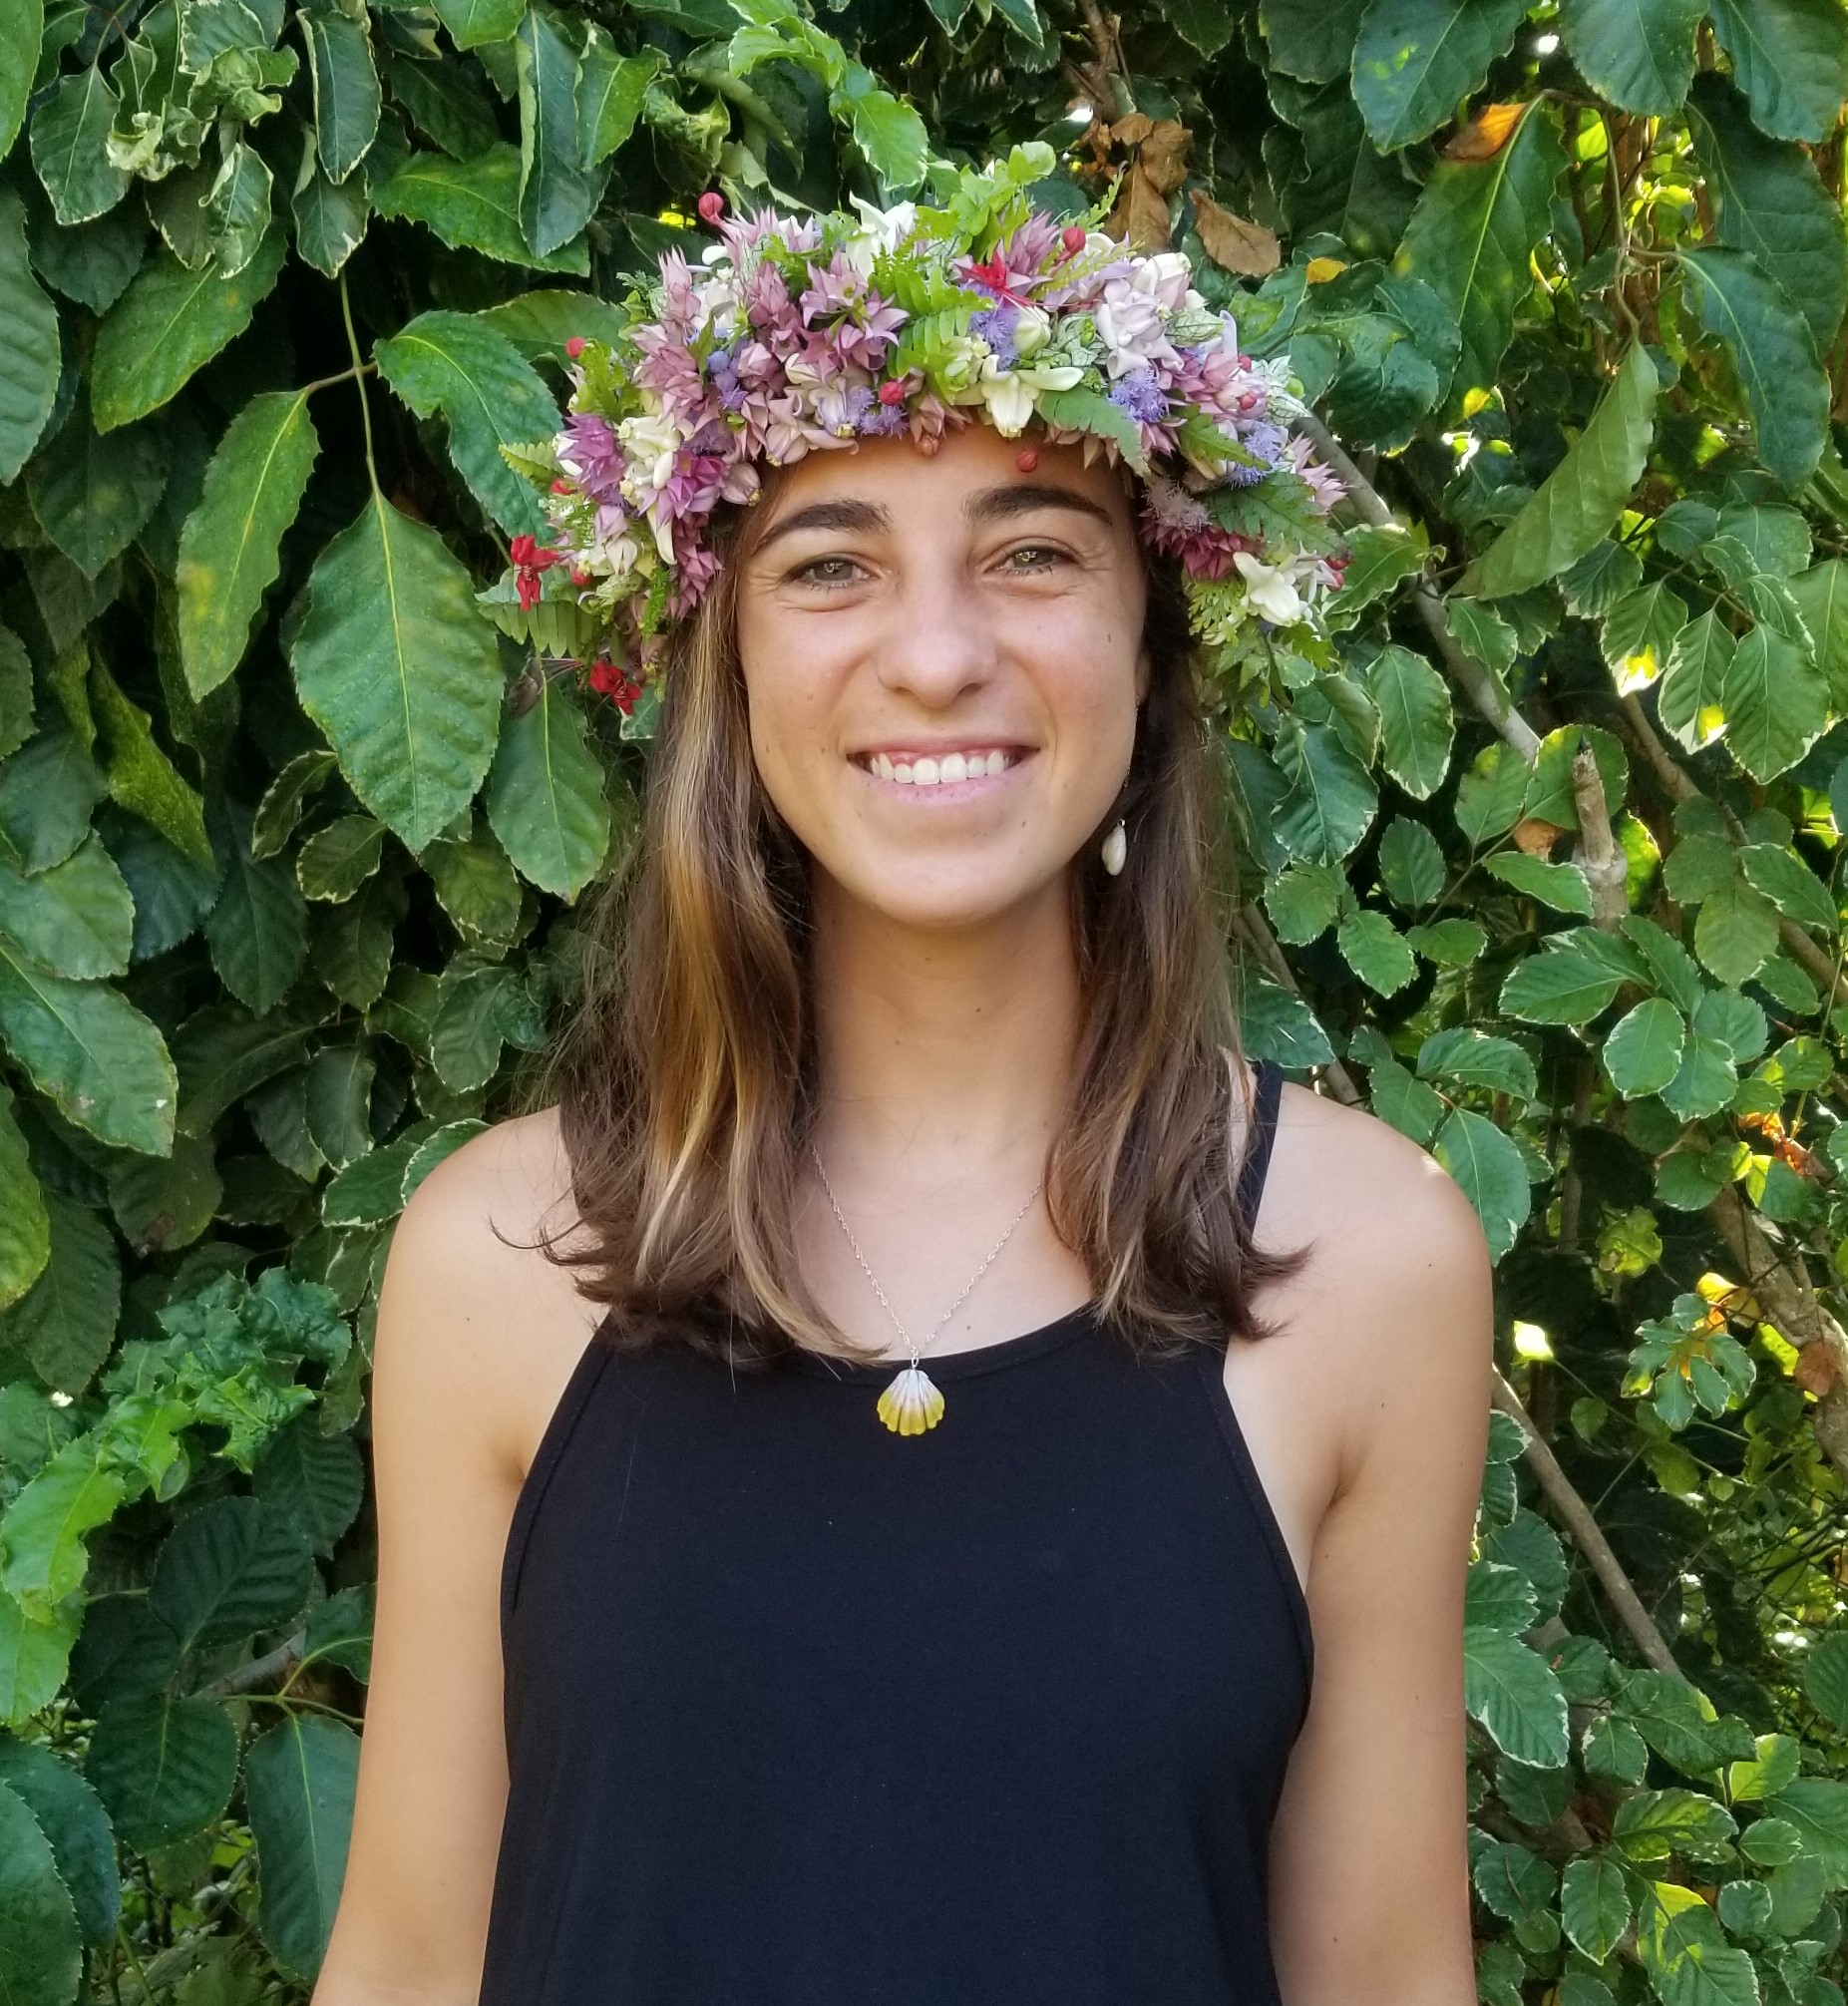 Young woman with light brown hair wearing a flower lei on her head